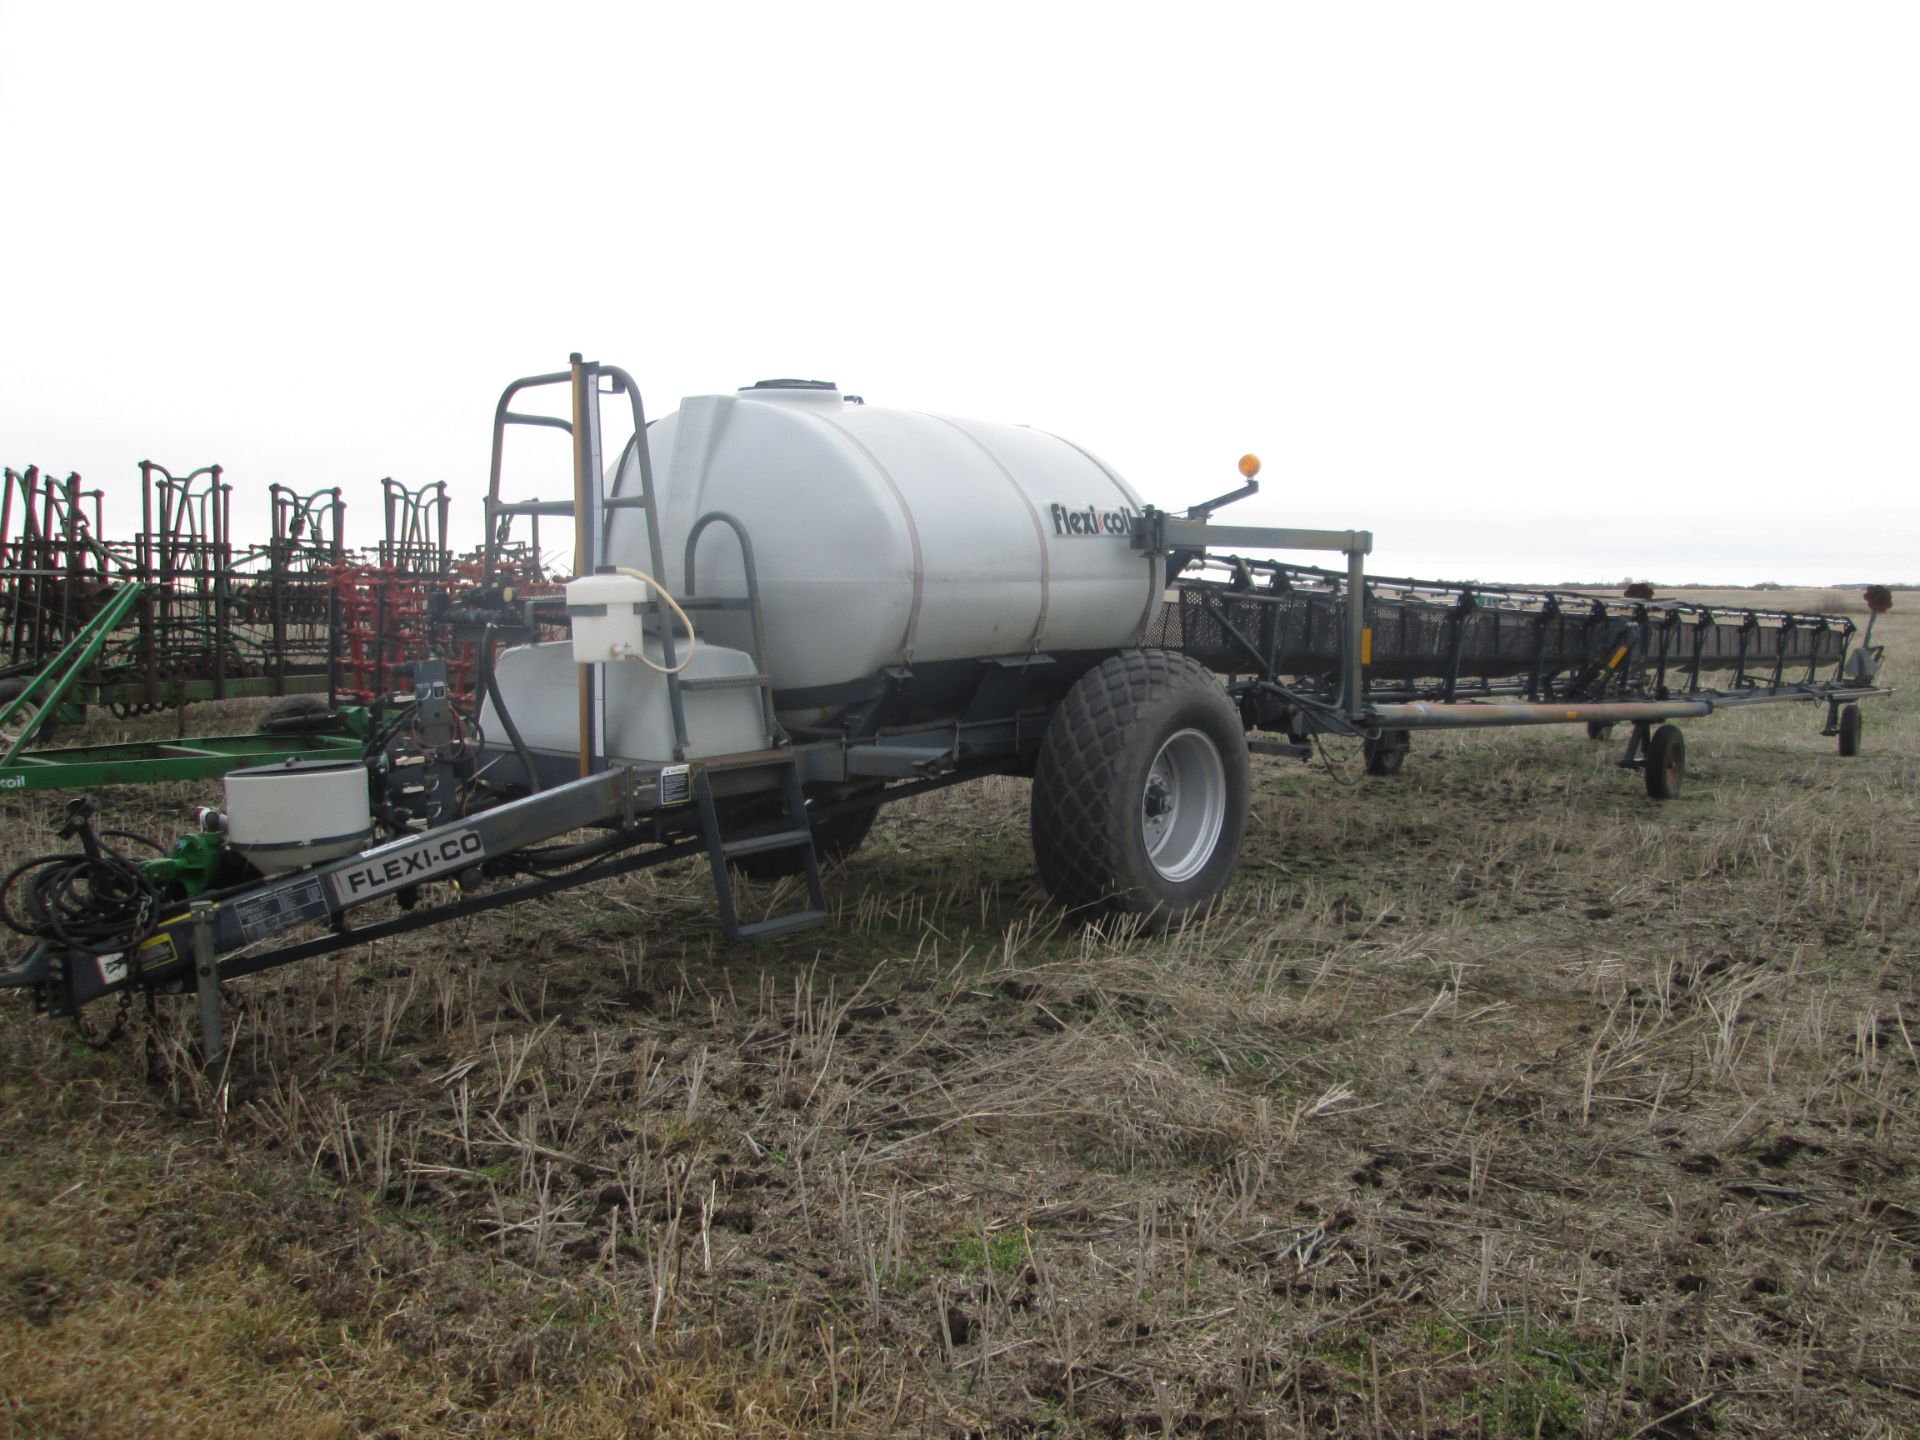 100' Flexicoil 67XL PT sprayer, 1250 gal (Imp), autofold, curtains, disc markers, hyd pump, rinse - Image 2 of 8